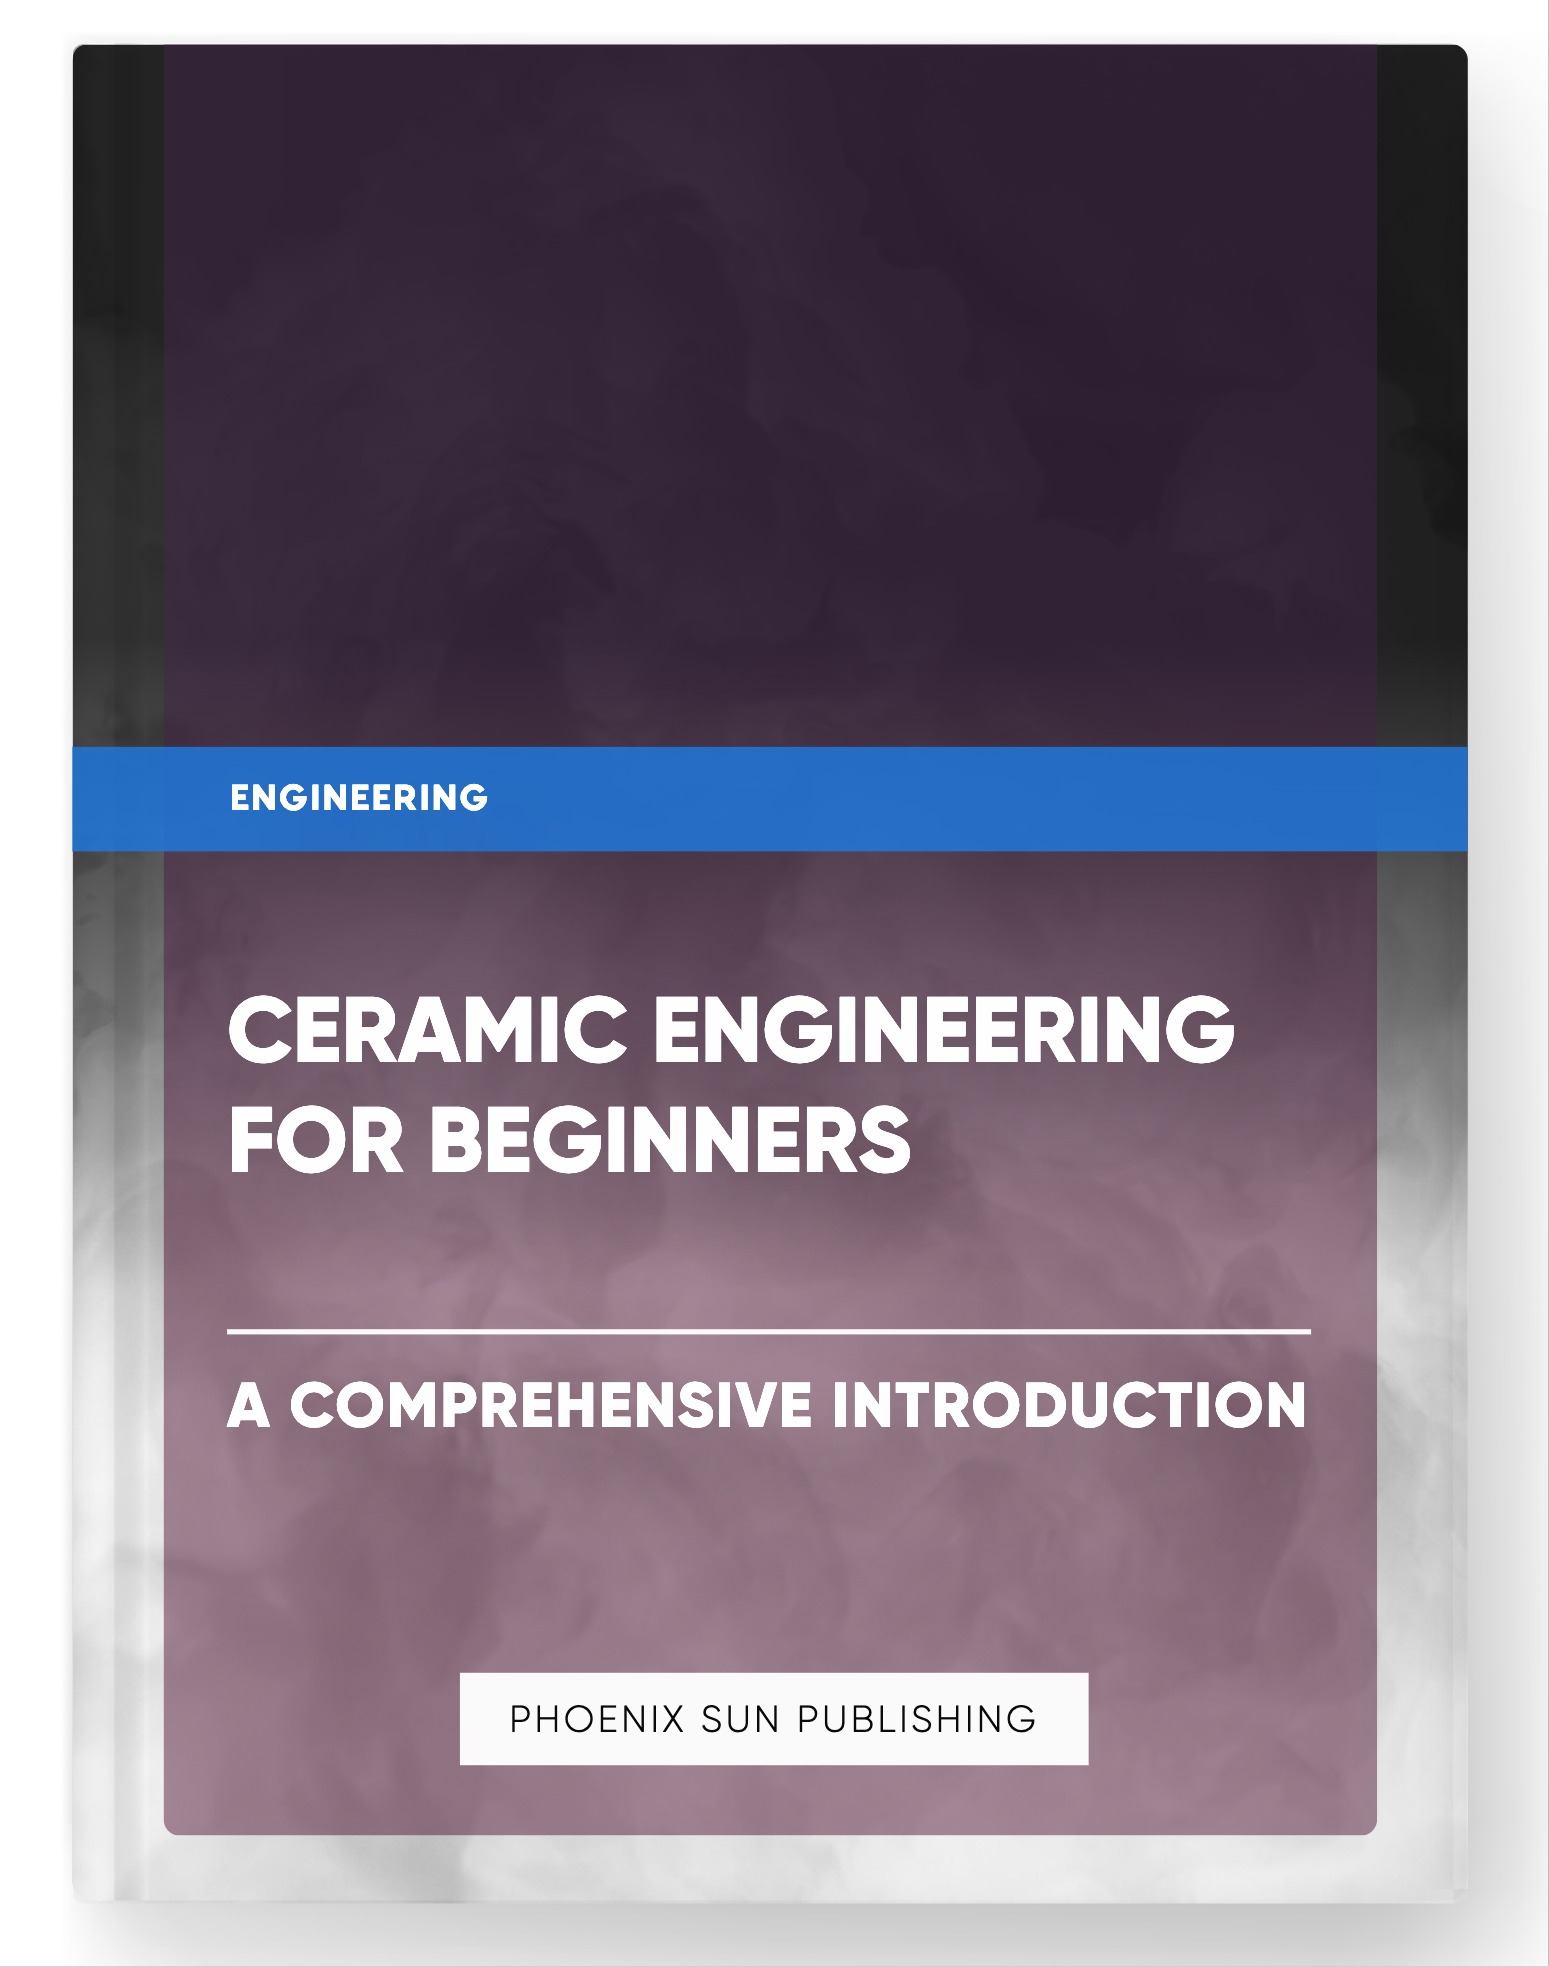 Ceramic Engineering for Beginners – A Comprehensive Introduction